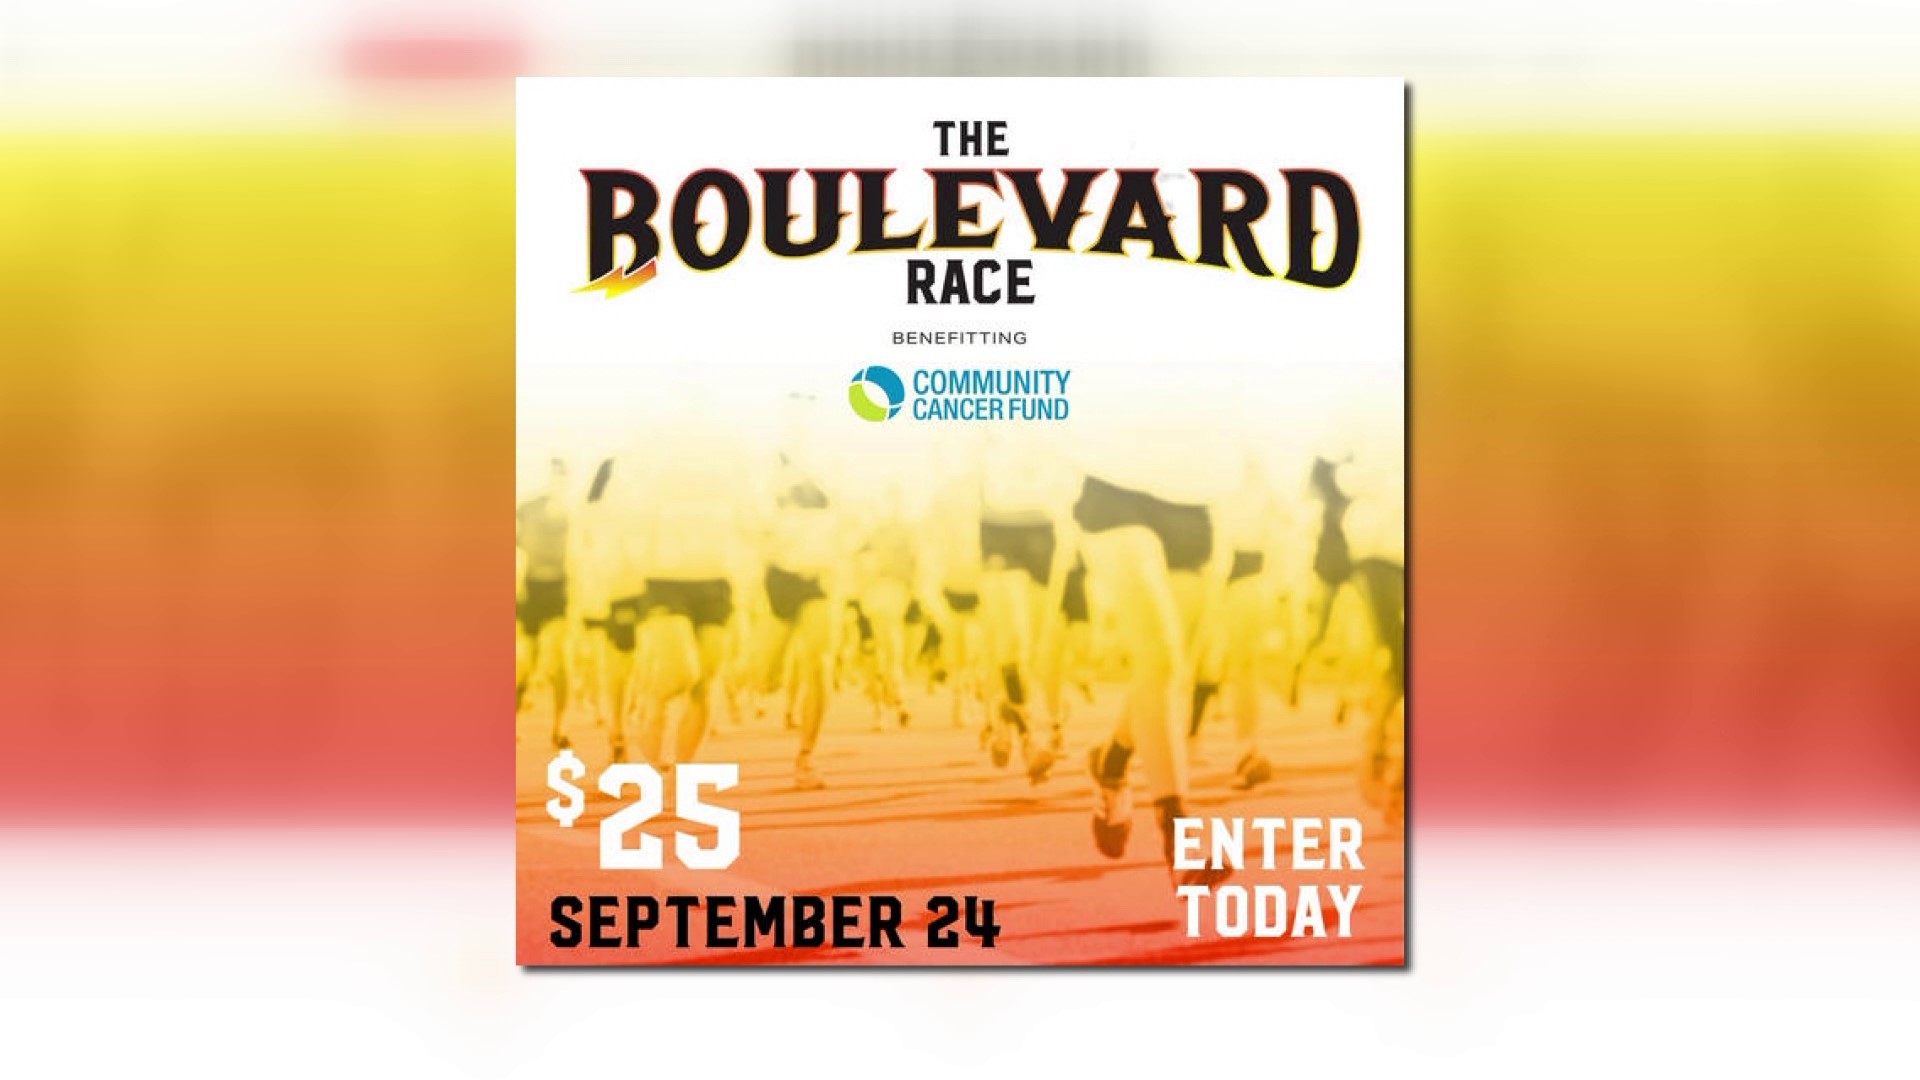 All runners and walkers can sign up to enter The Boulevard Race that will be taking place on Sunday, Sept. 24. Entry is $25.